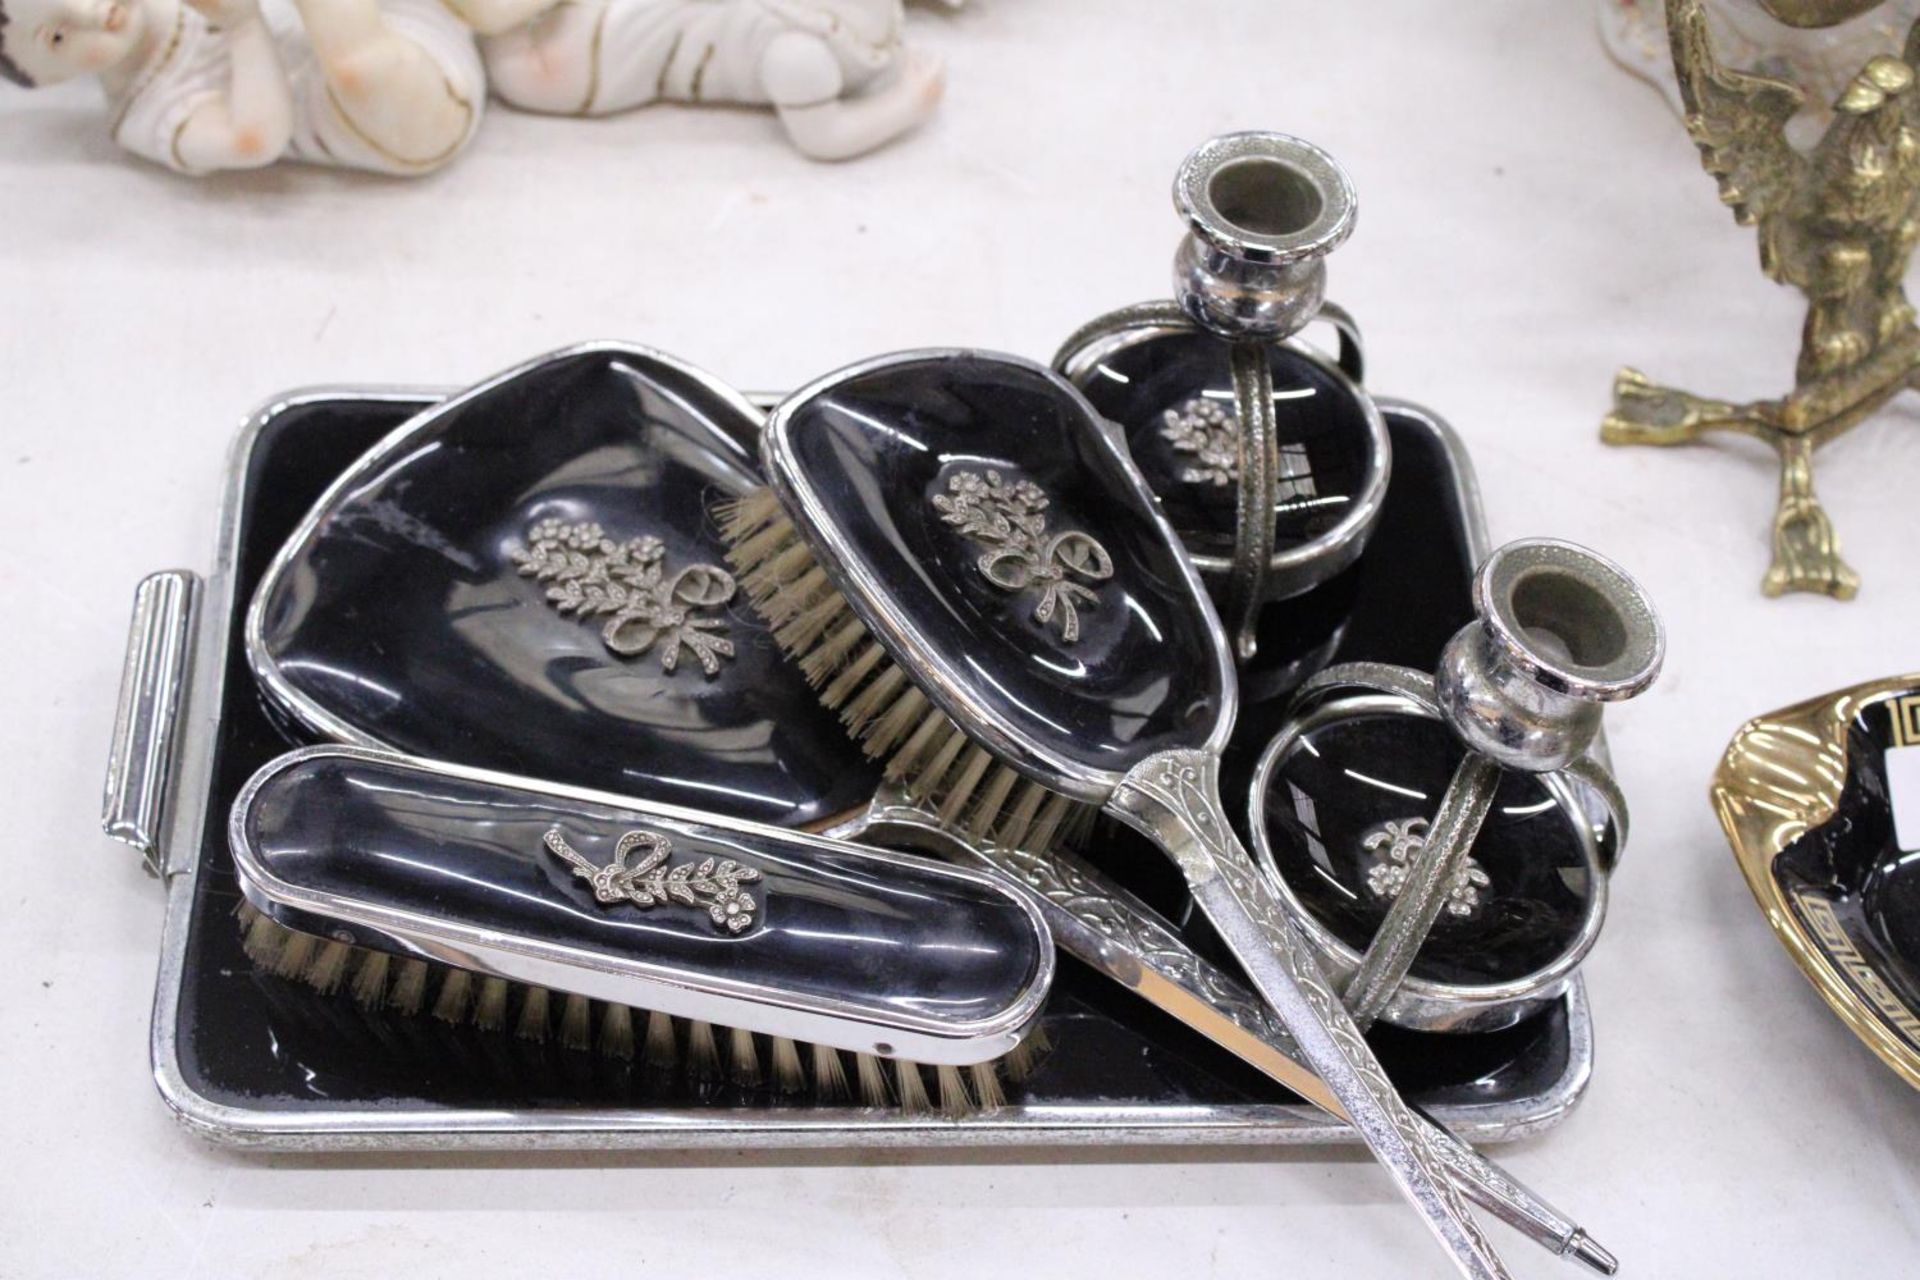 A VINTAGE BLACK DRESSING TABLE VANITY SET TO INCLUDE A HAND MIRROR, TWO BRUSHES AND TRAY - PLUS